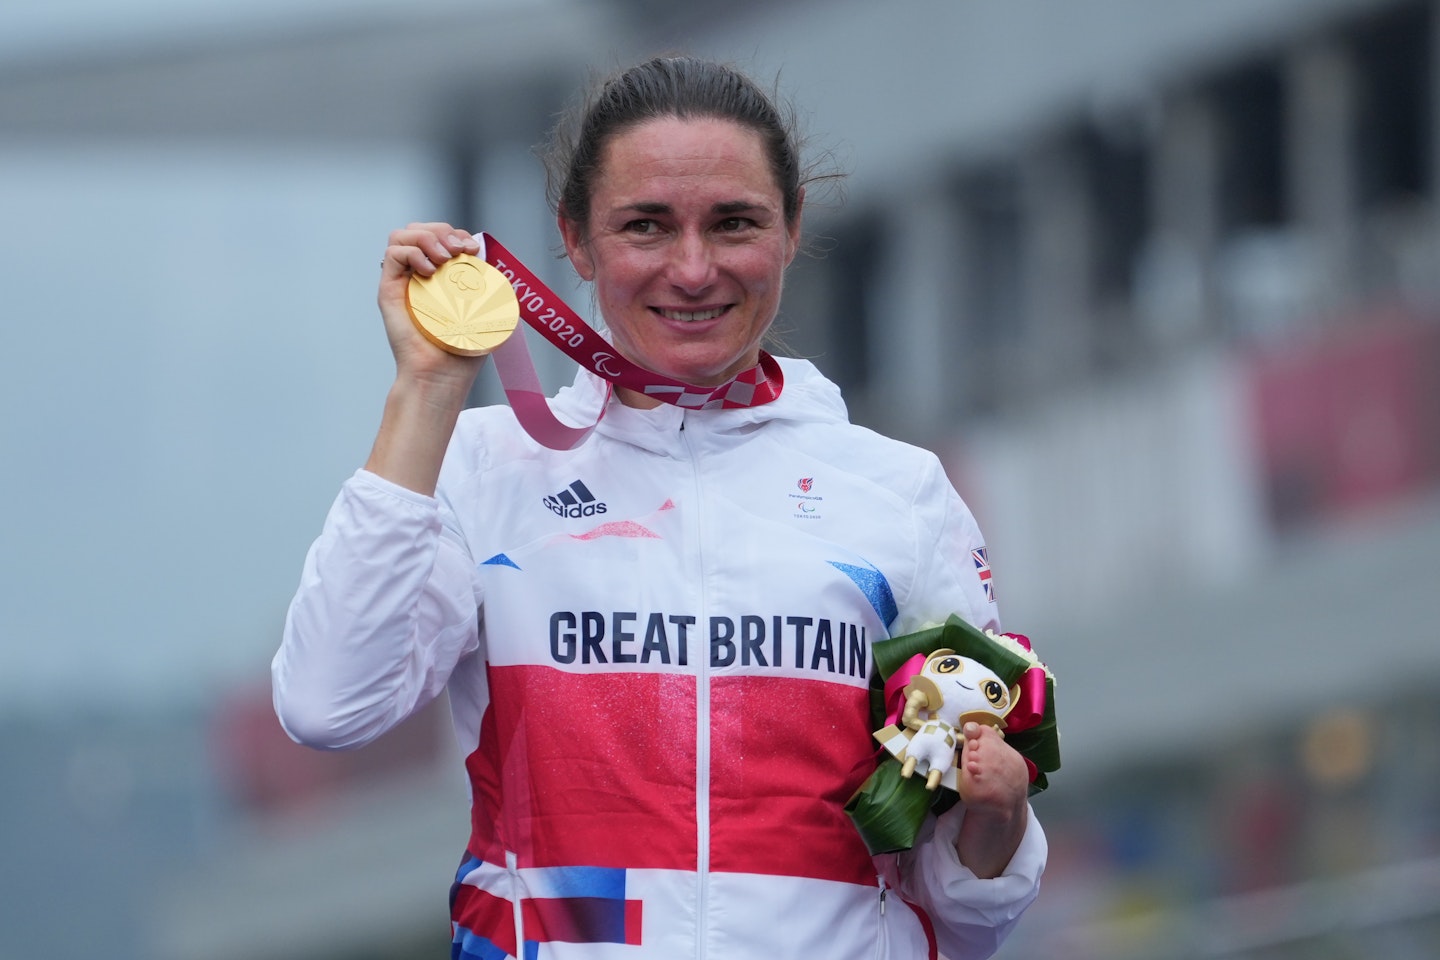 Dame Sarah Storey became the most most successful British Paralympian of all time